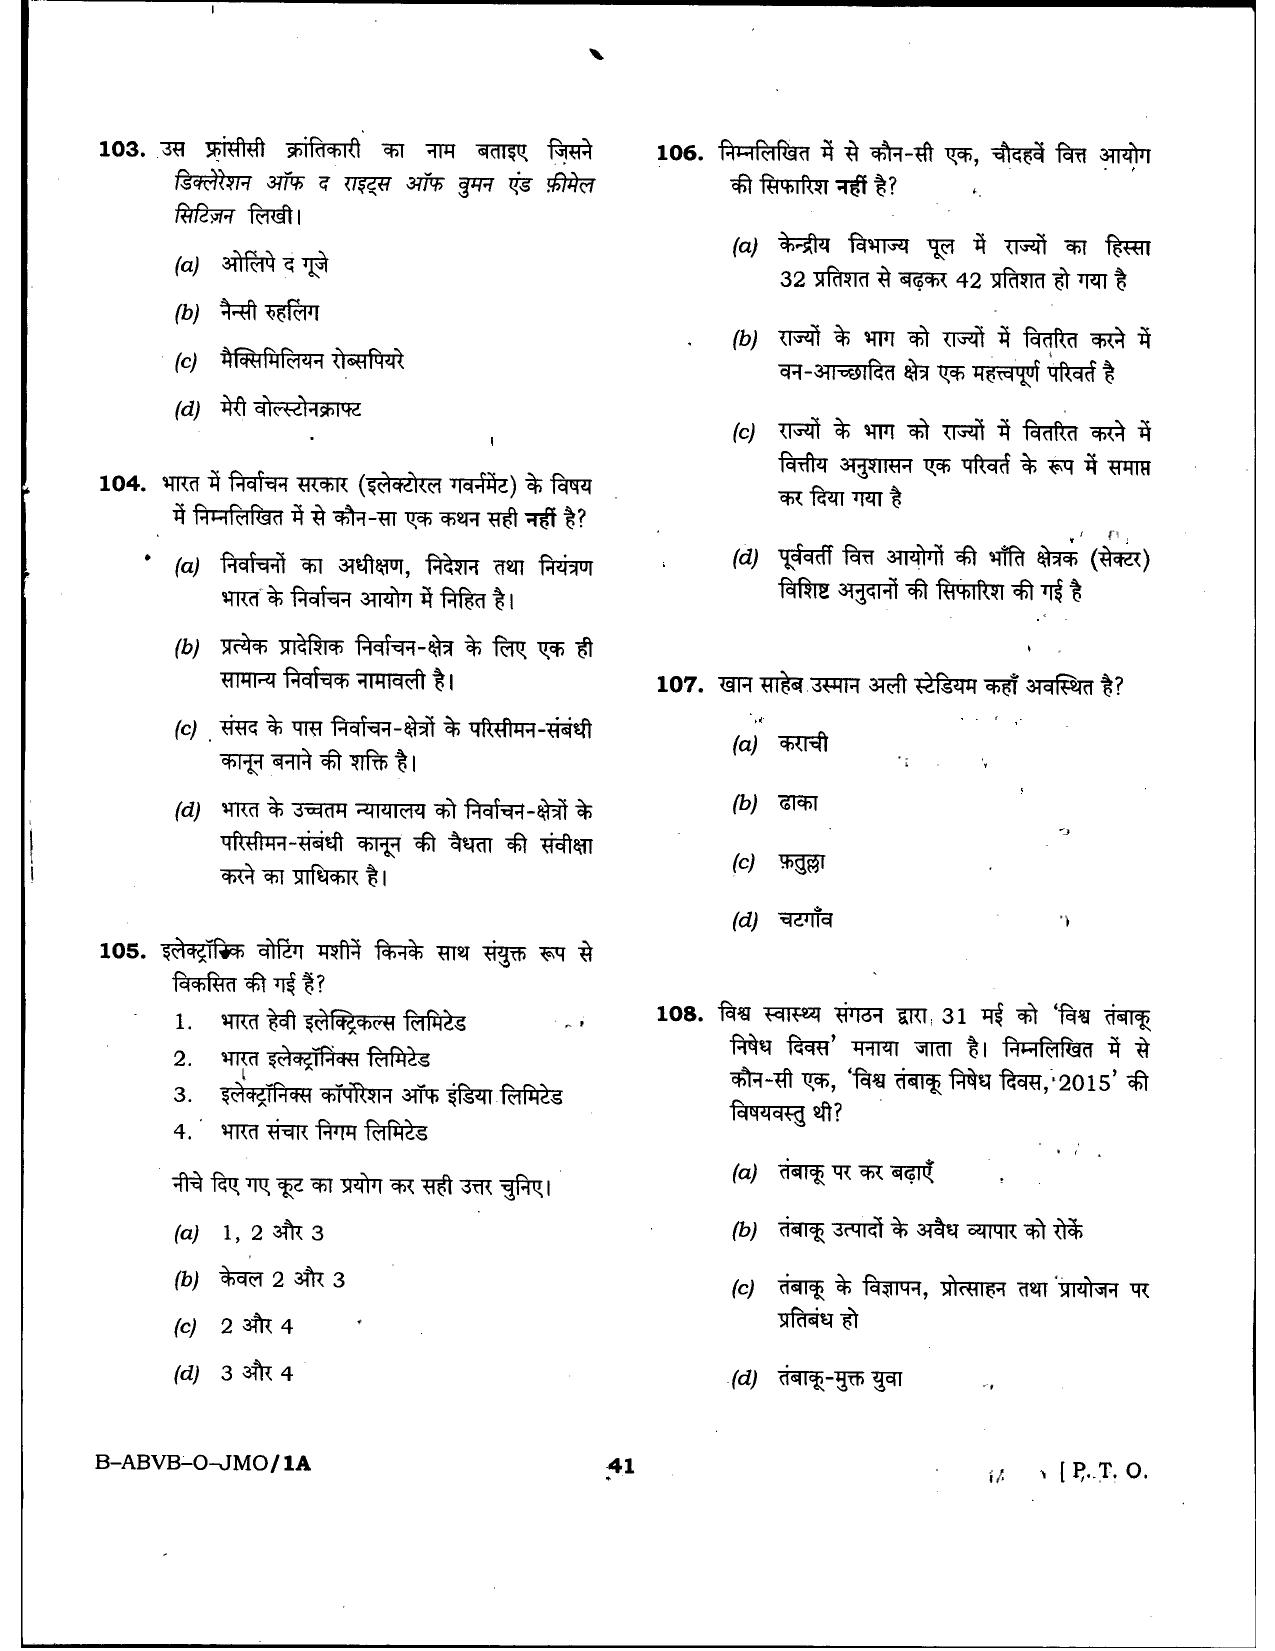 HPSSSB Fitter Model Papers: General Knowledge - Page 41